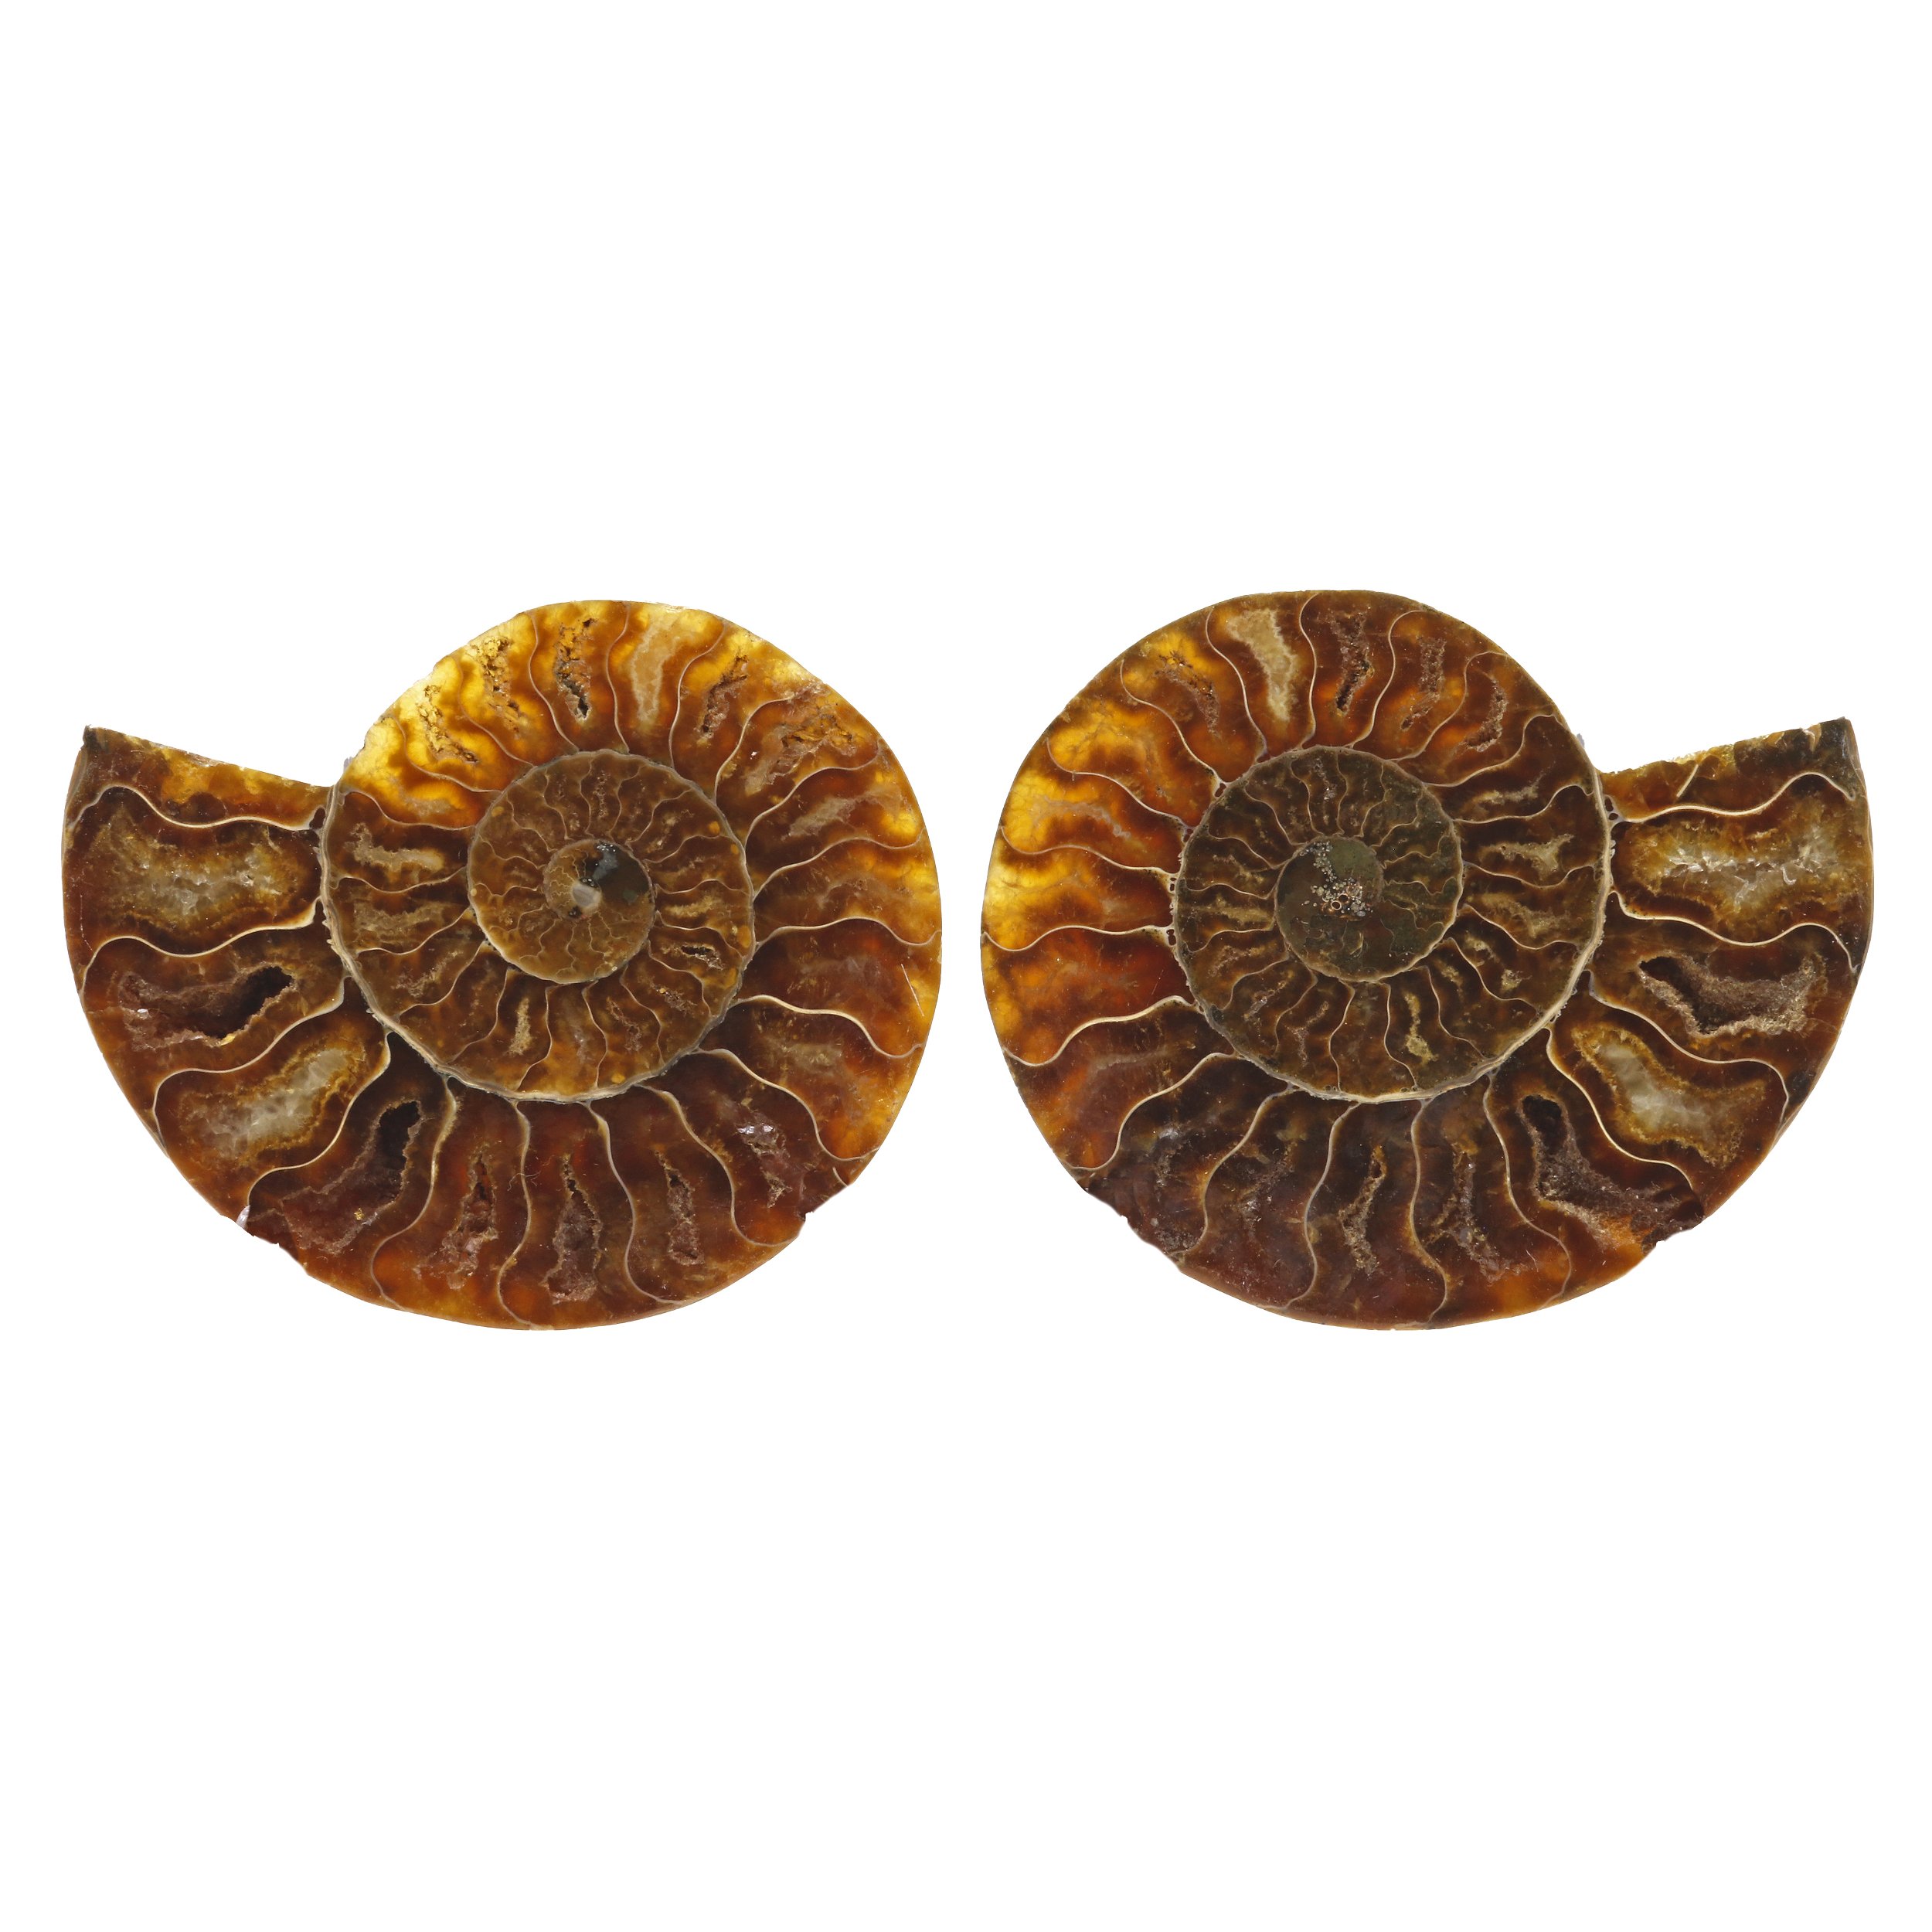 Ammonite Fossil Pair In Acrylic Stands - Druze Pockets